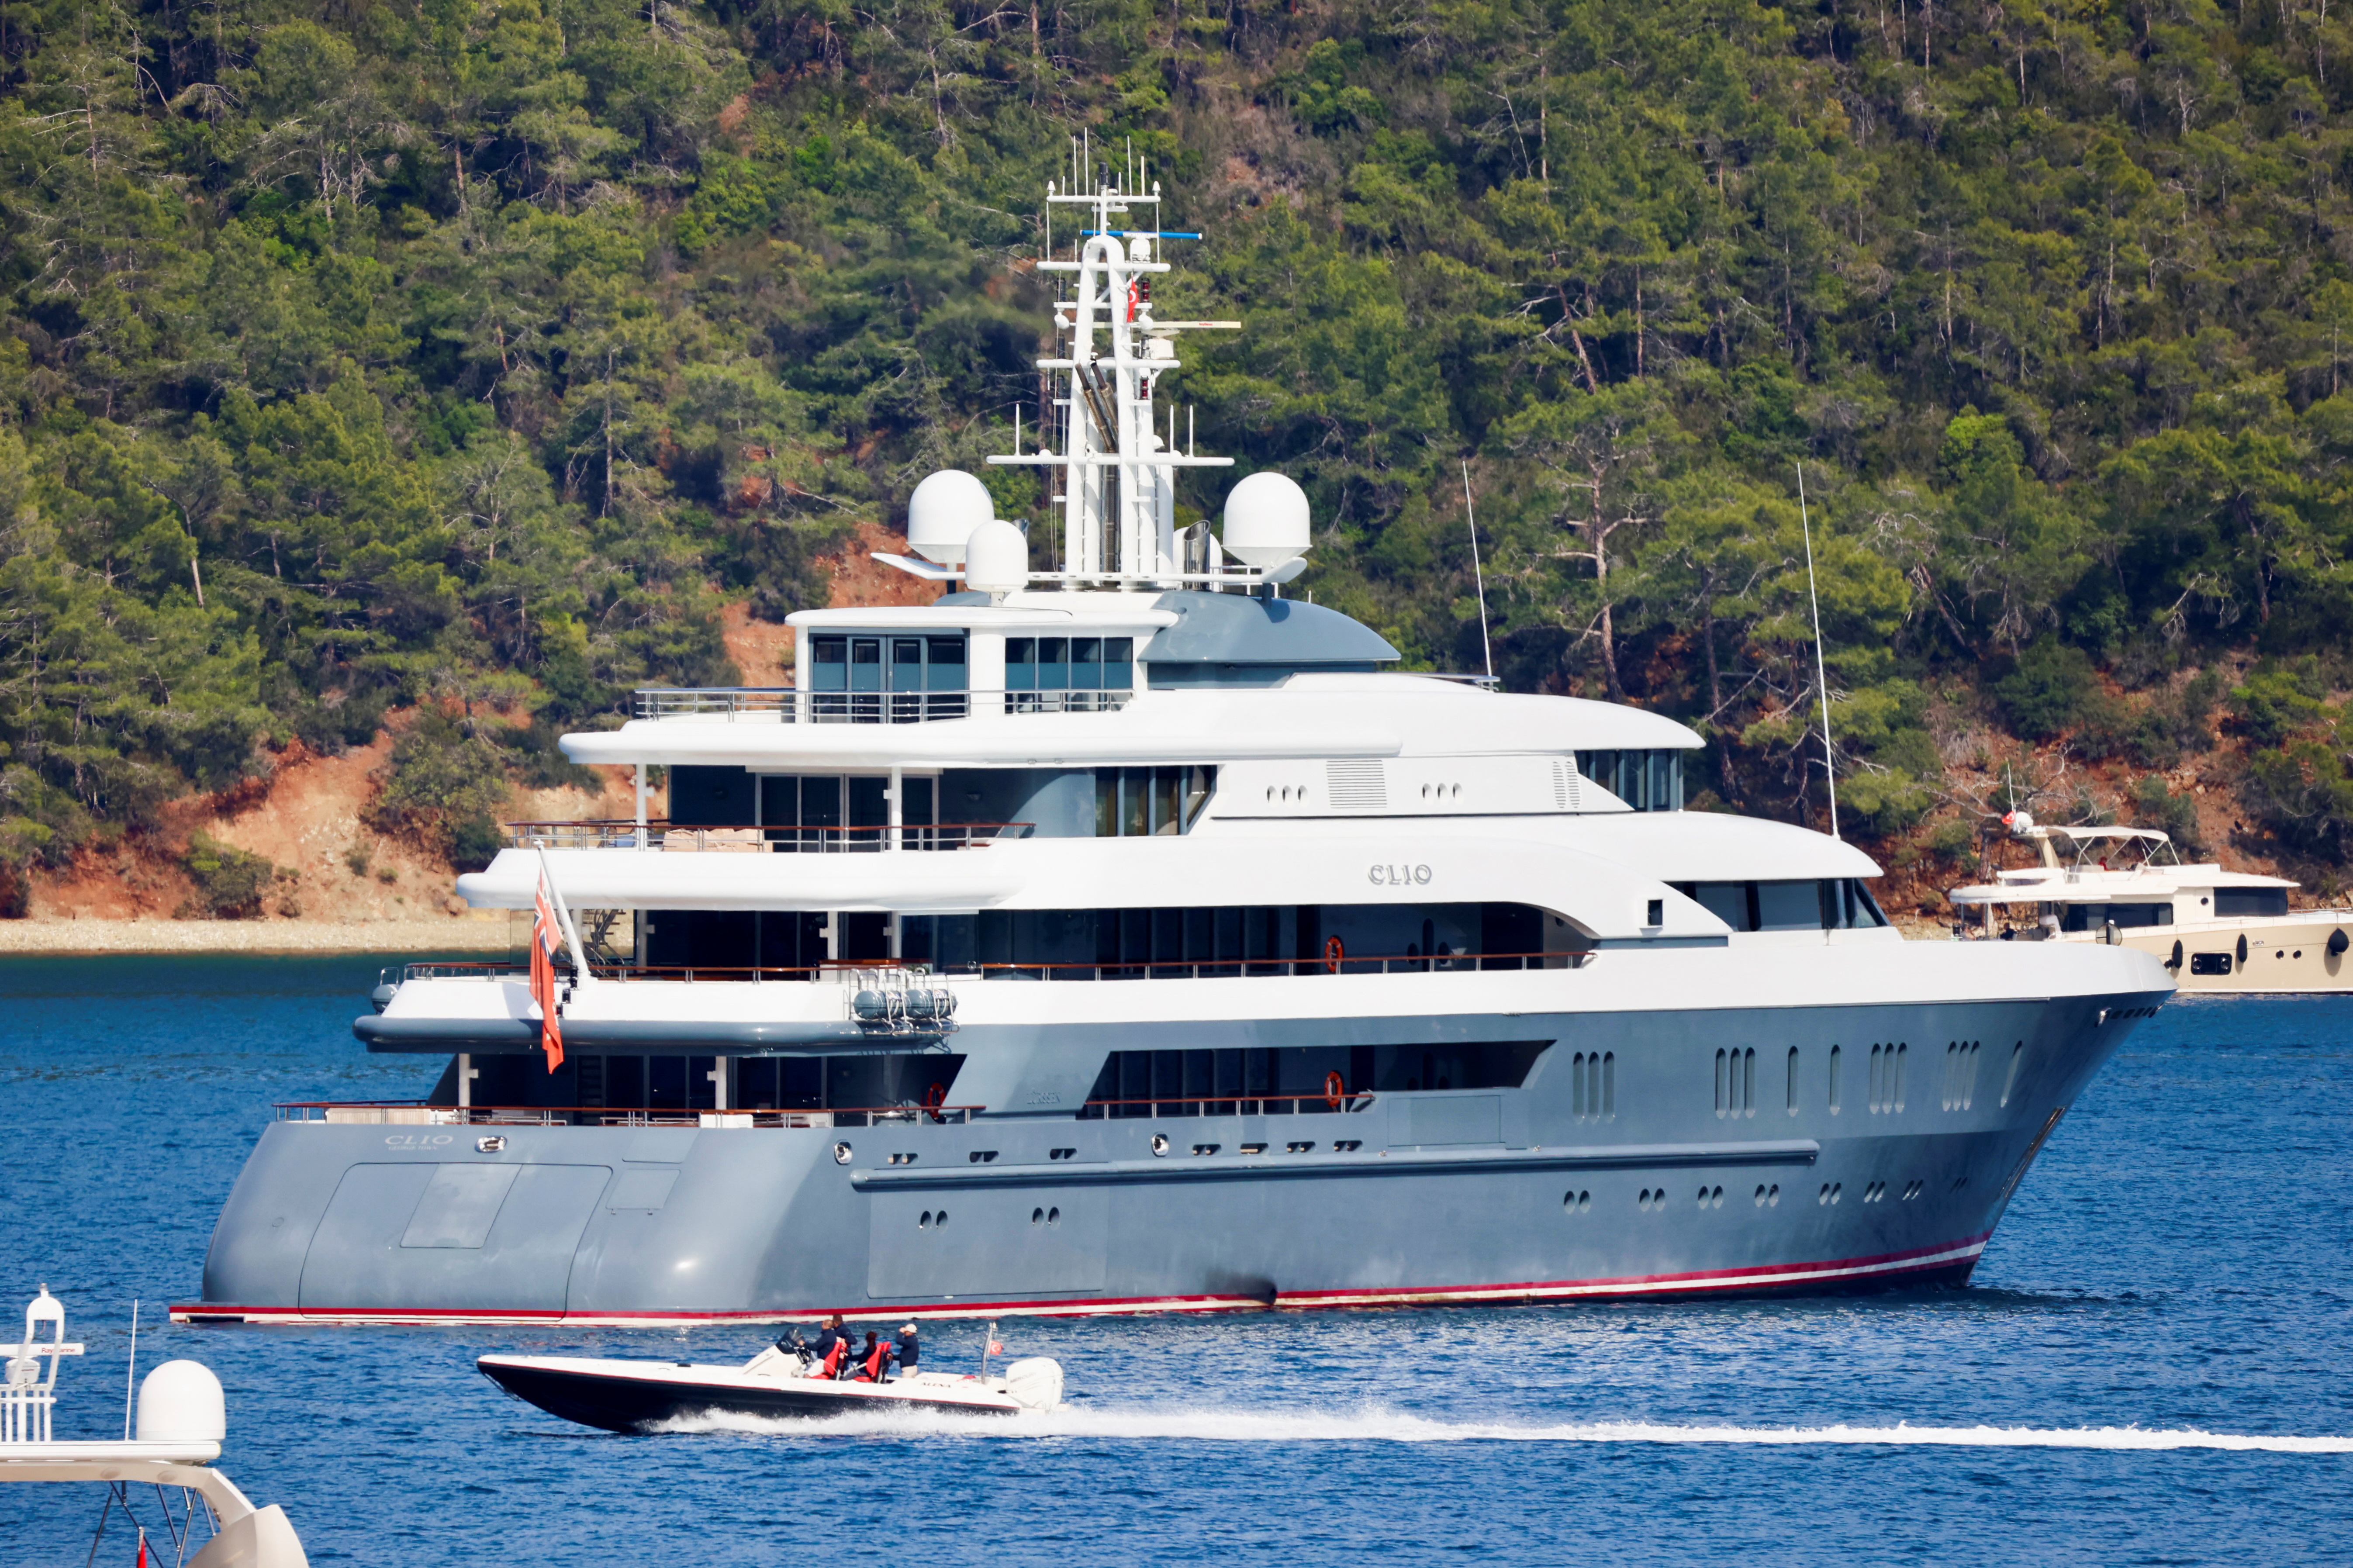 Clio, a yacht linked to Russian aluminum tycoon Oleg Deripaska, is pictured in Gocek Bay